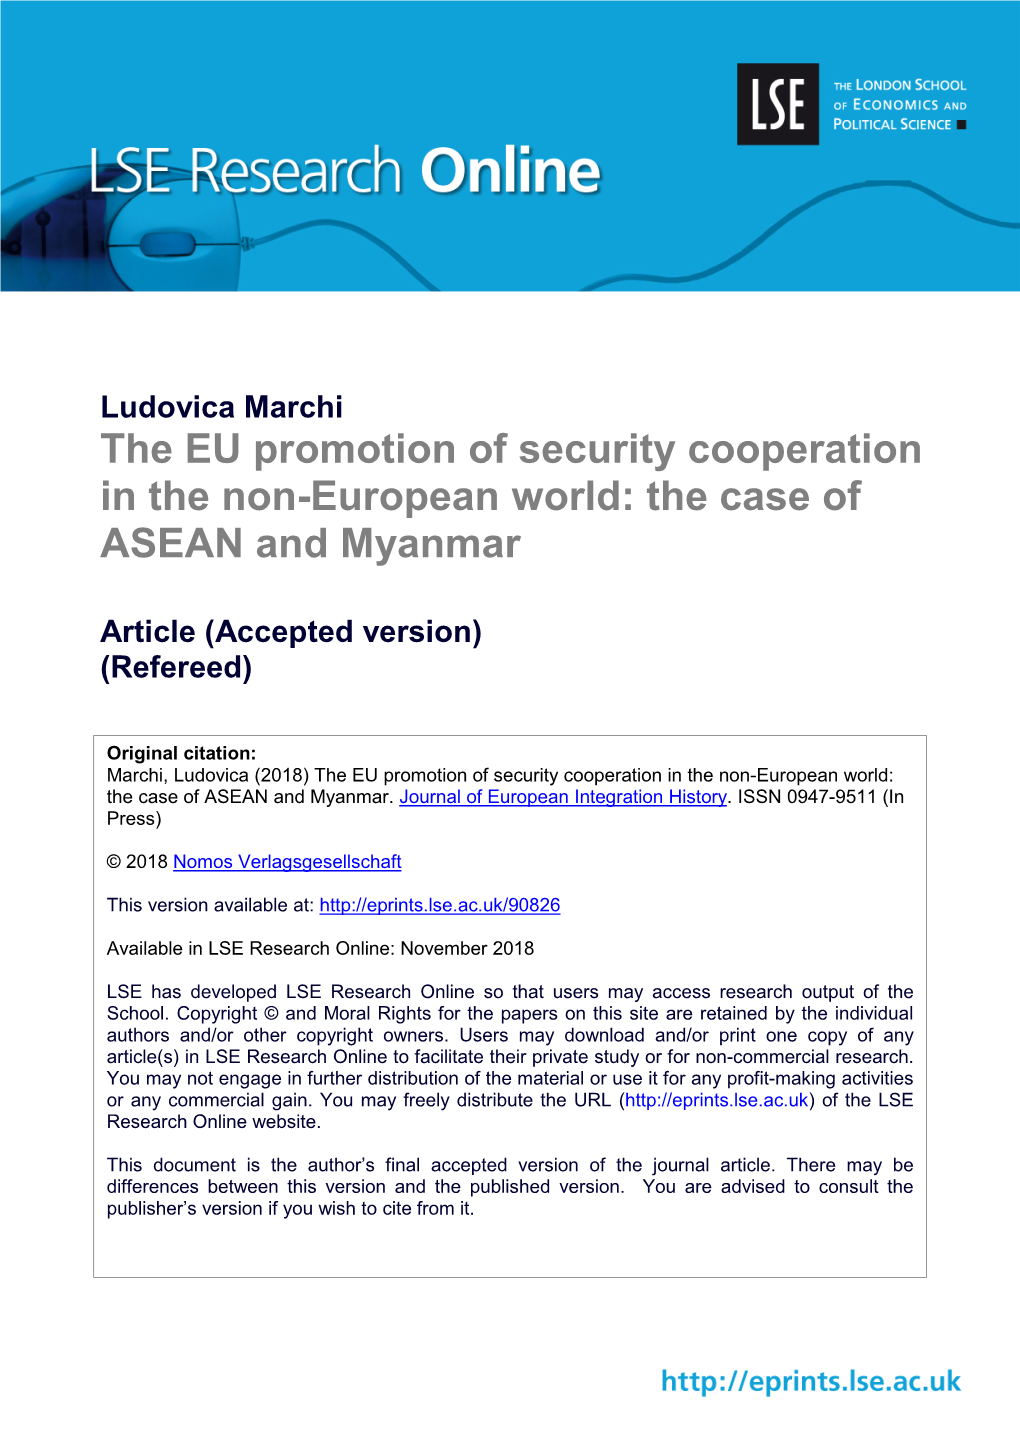 The EU Promotion of Security Cooperation in the Non-European World: the Case of ASEAN and Myanmar